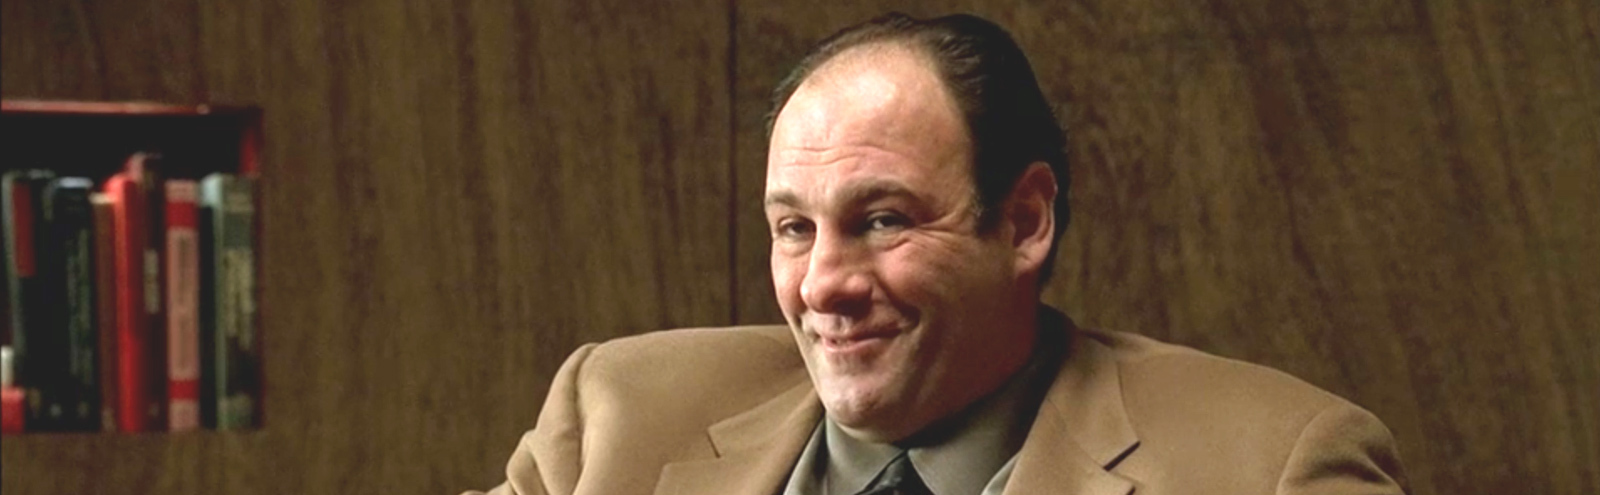 James Gandolfini’s Son Prepared To Play The Young Tony Soprano In A Very Intensive Way